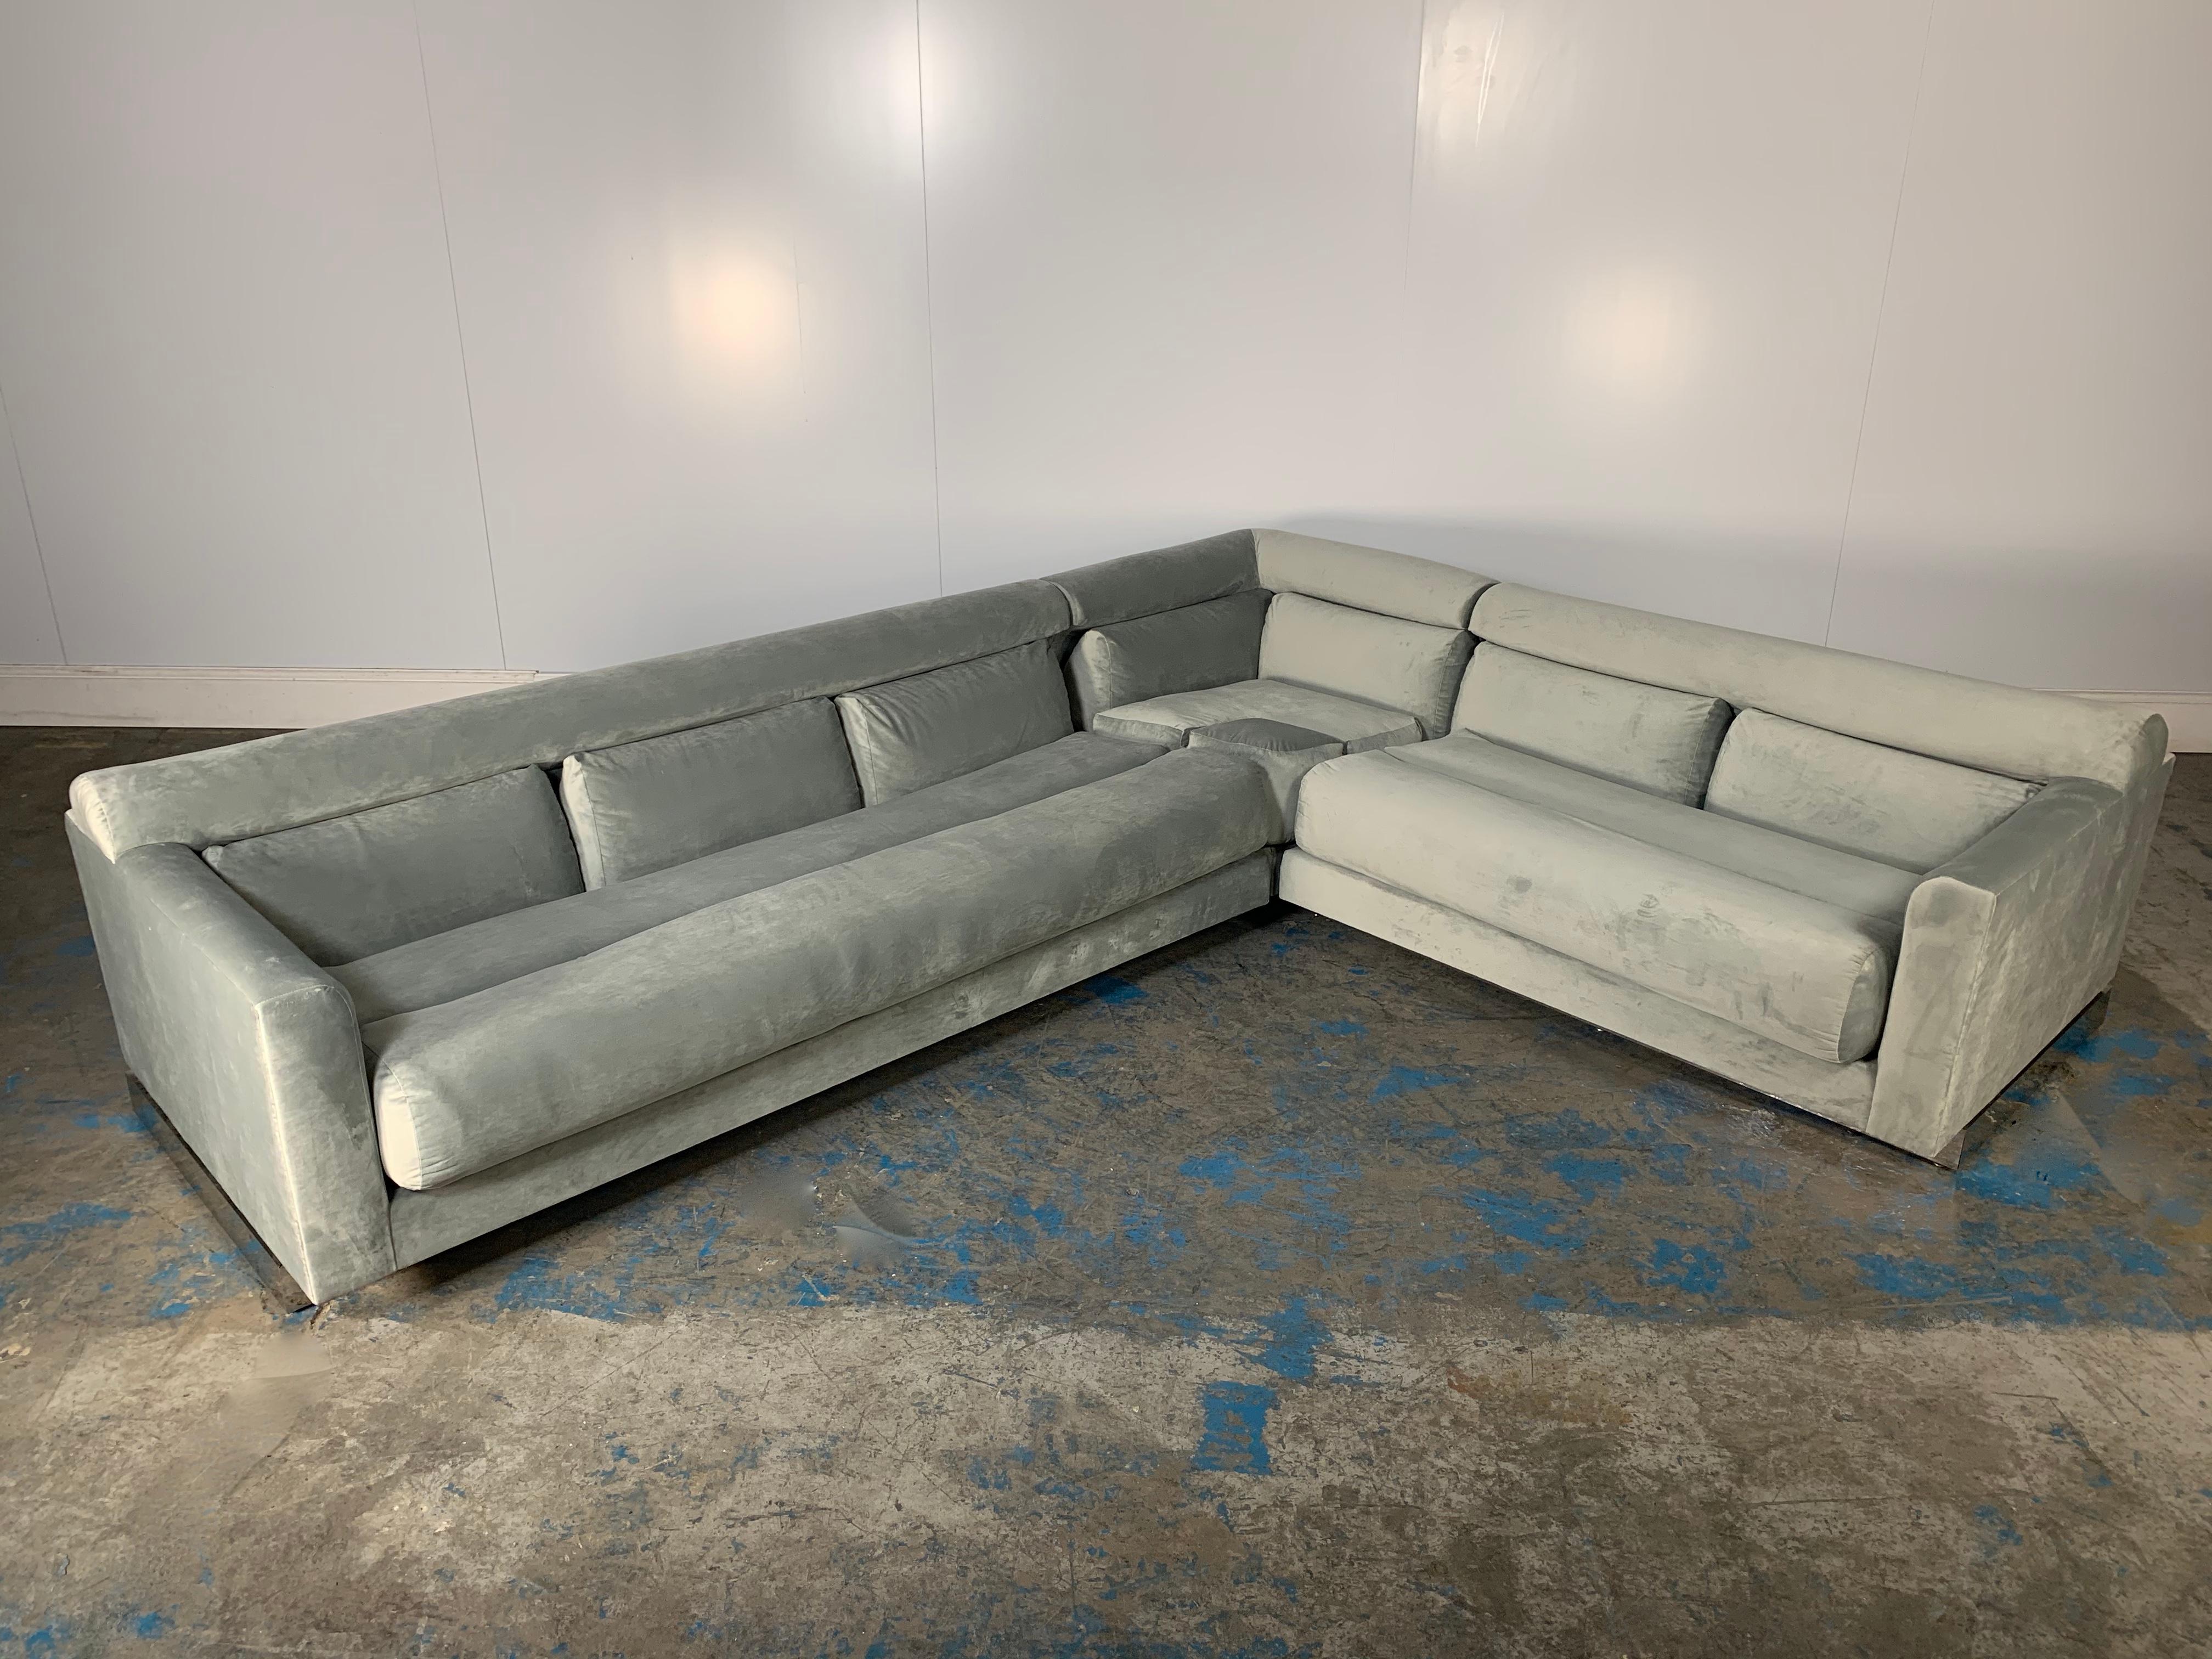 On offer on this occasion is an iconic L-Shape, 5-seat sectional sofa from the world renown German furniture designer, Vladimir Kagan.

As you will no doubt be aware by your interest in this Kagan masterpiece, his pieces are the epitome of